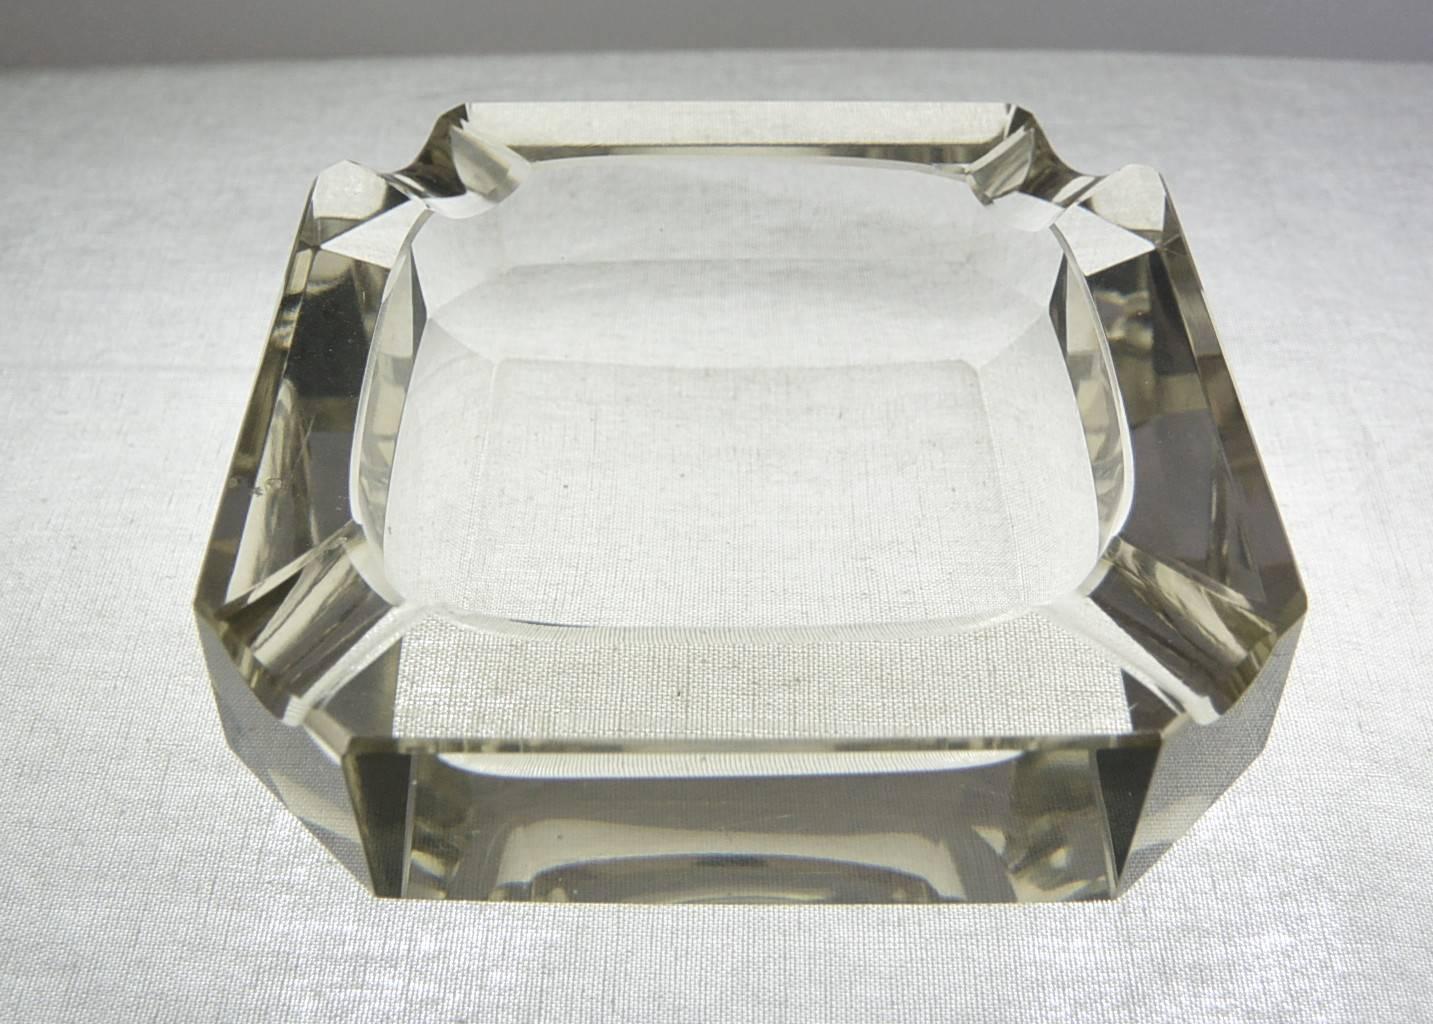 Vintage Faceted Crystal Ashtray 1